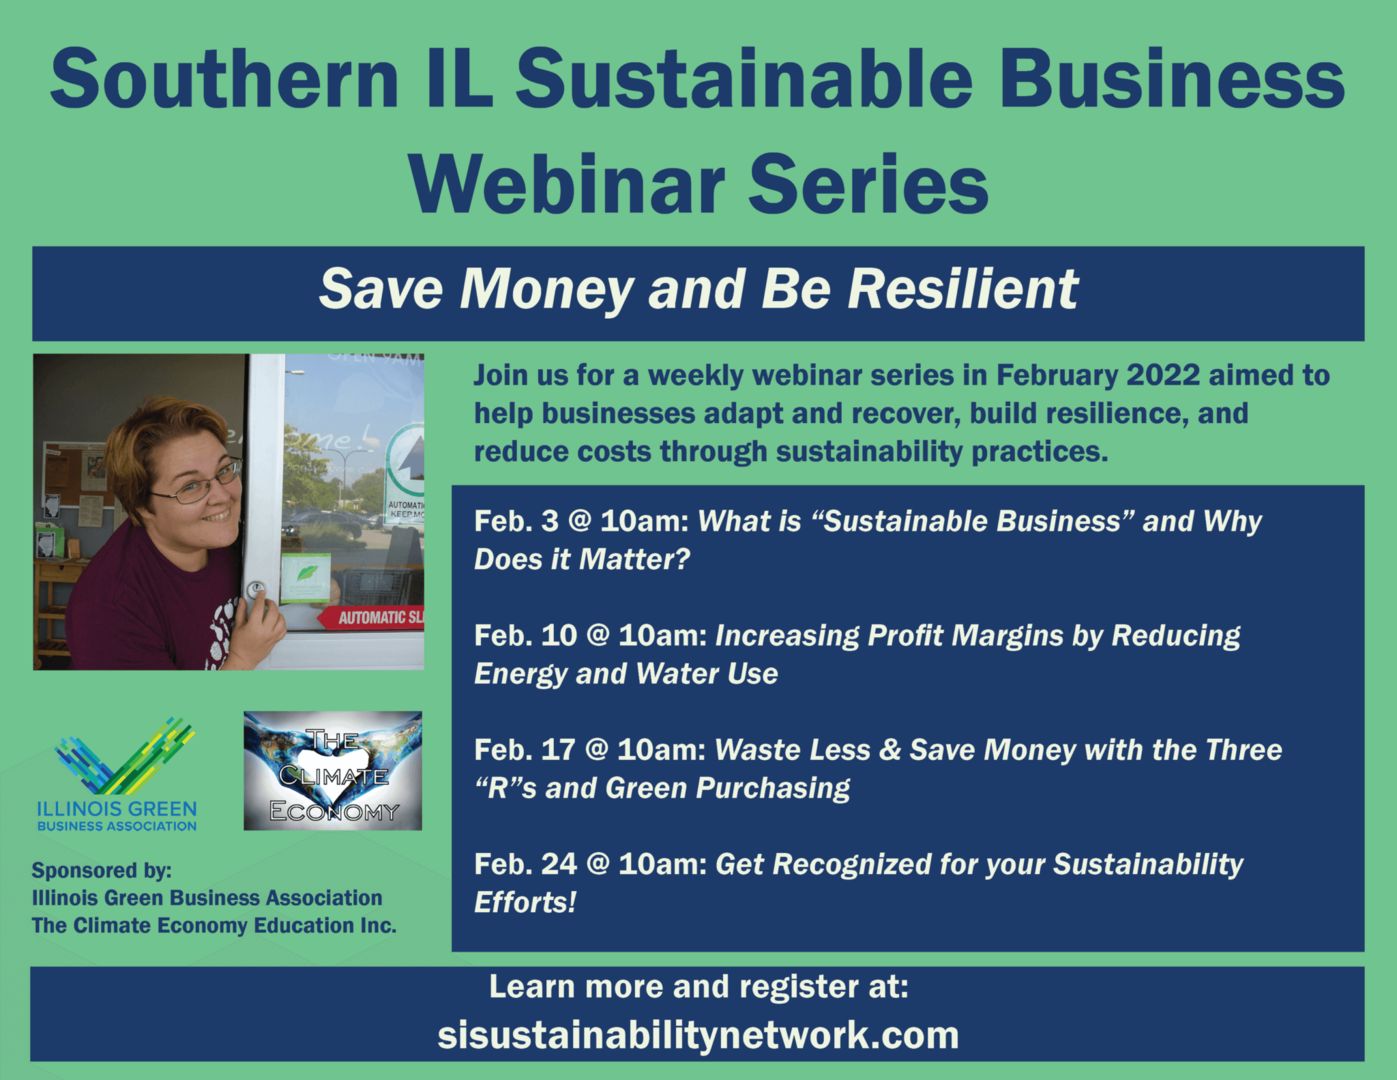 Save Money and Be Resilient - Southern Illinois Sustainable Business Webinar Series Part 4 of 4, Online Event